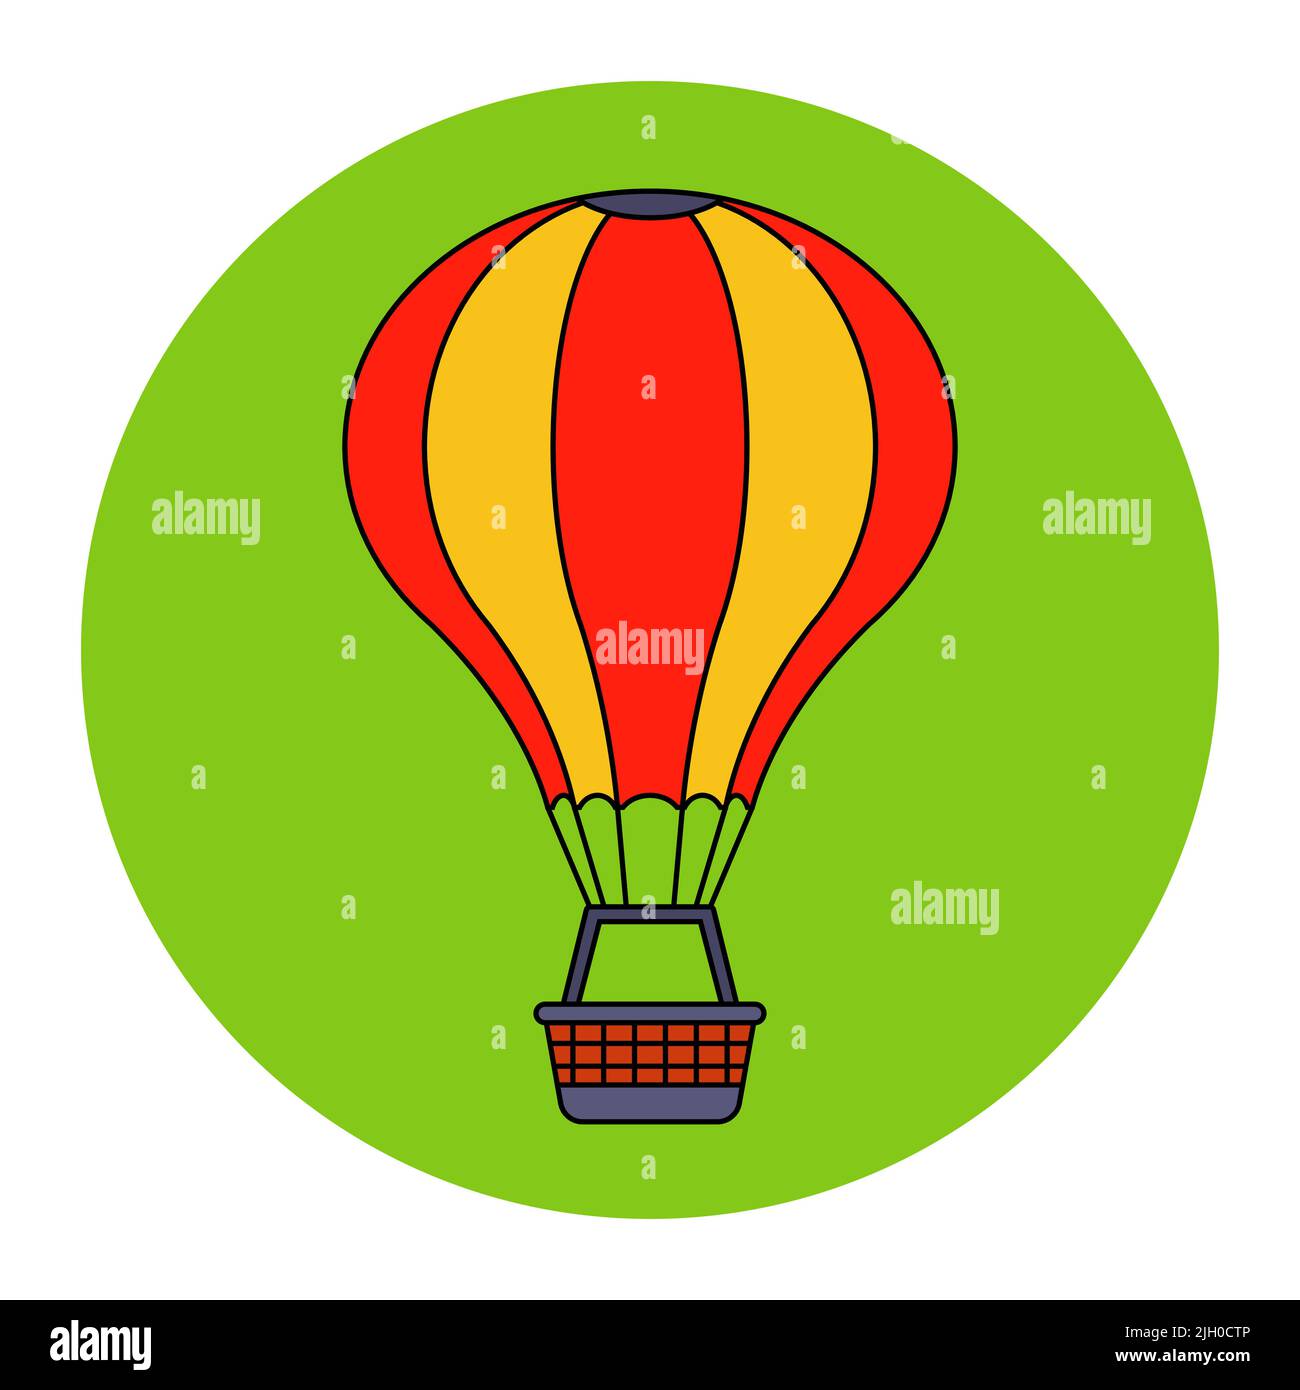 the attraction will rise into the air in a hot air balloon. a joyful aeronaut rises into the sky. flat vector illustration. Stock Vector